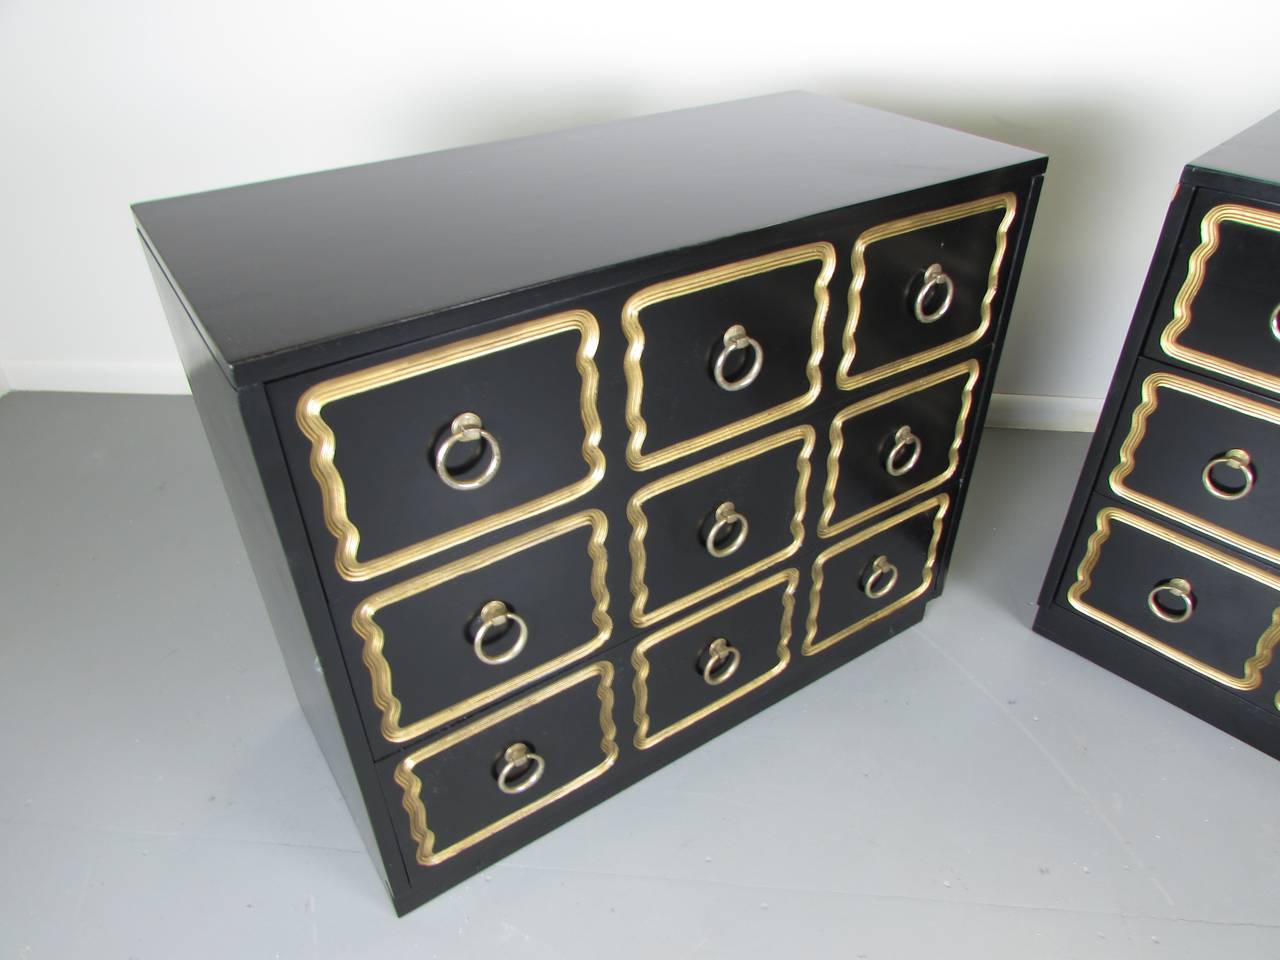 Hollywood Regency Pair of Glamorous Espana Chests in Black Lacquer by Dorothy Draper, 1950s